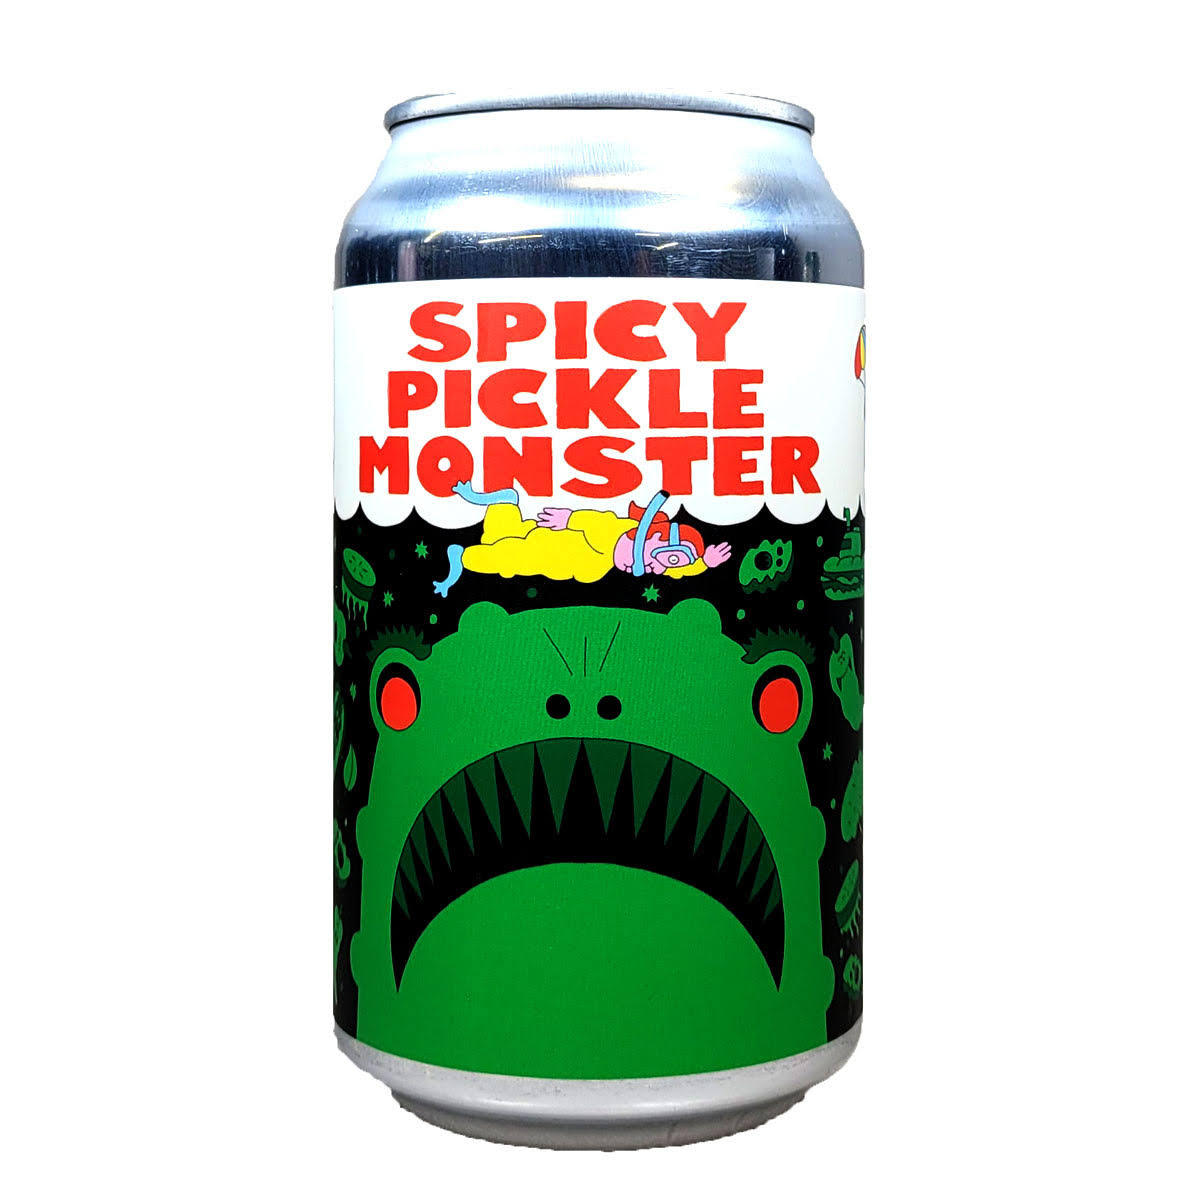 Prairie Spicy Pickle Monster Sour - 12oz Can